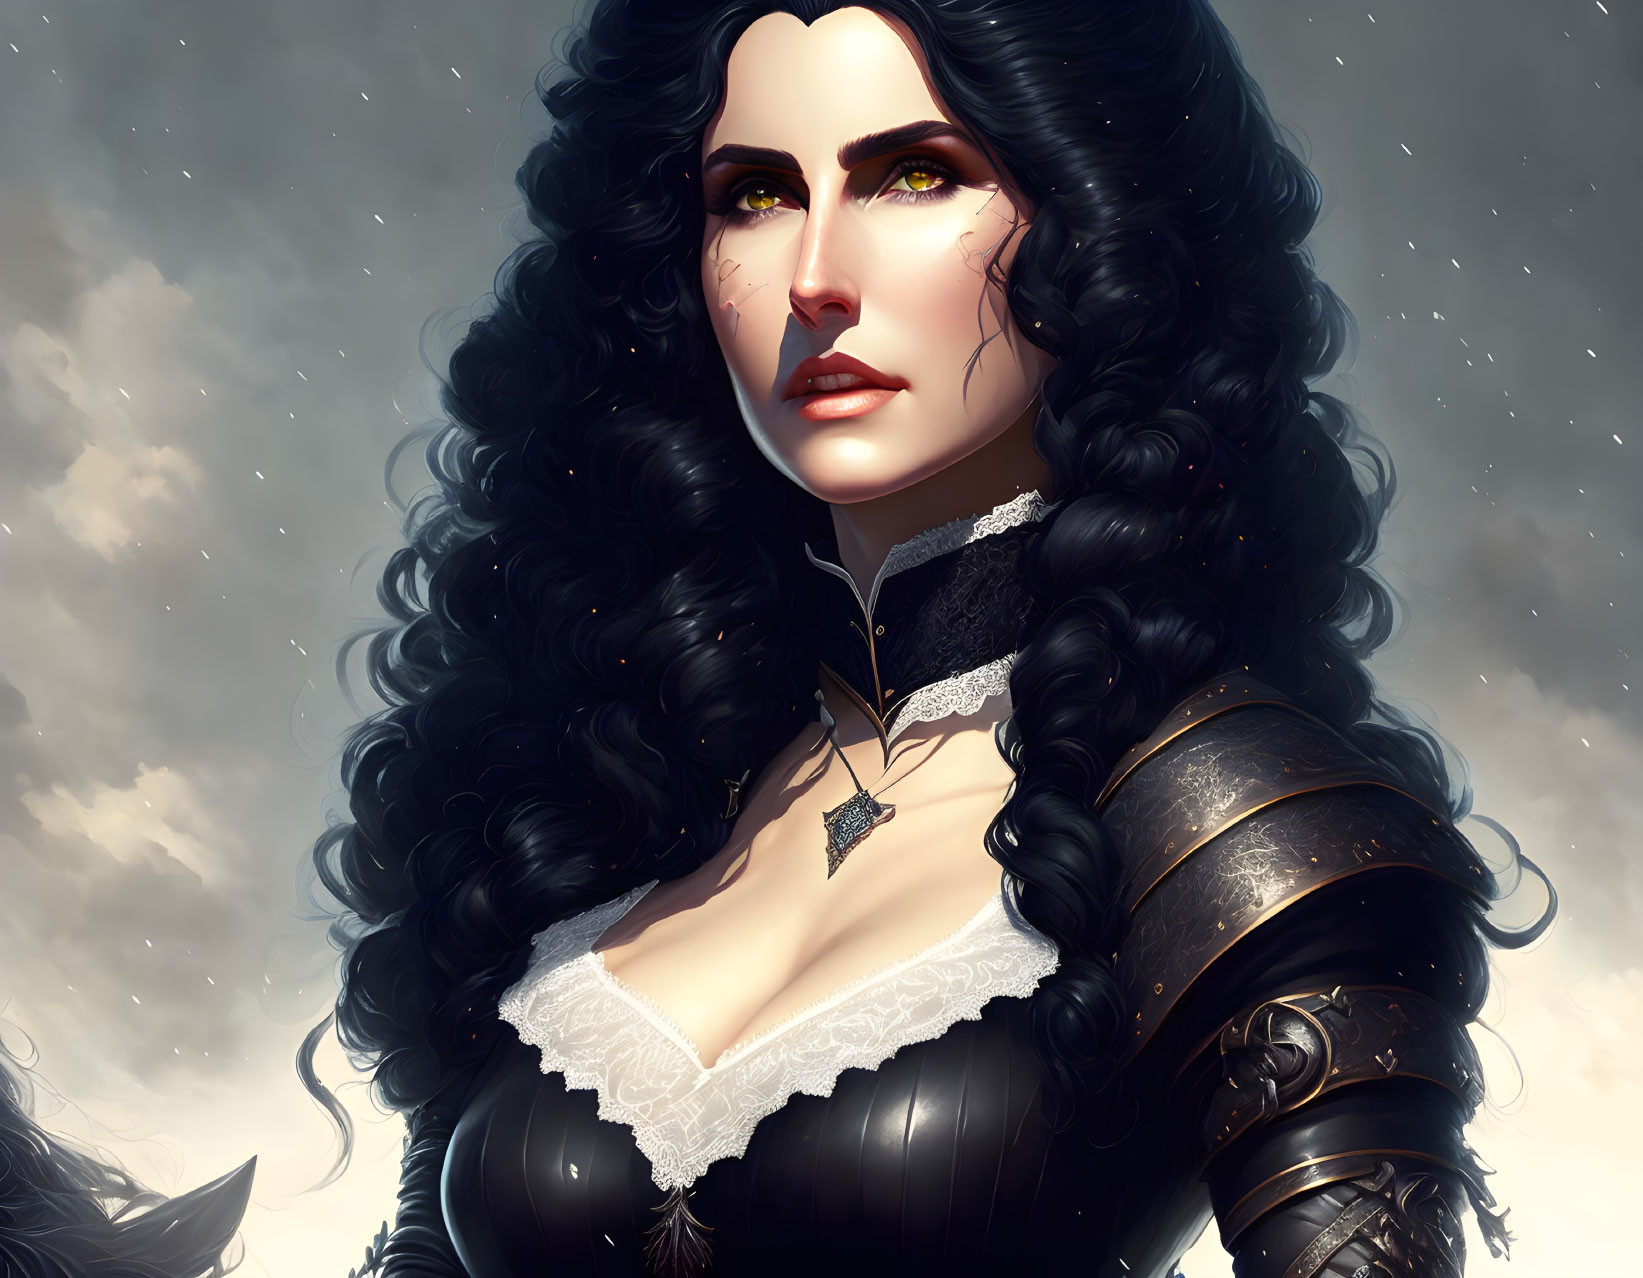 Detailed Illustration: Woman with Long Curly Black Hair, Green Eyes, and Black Armored Out